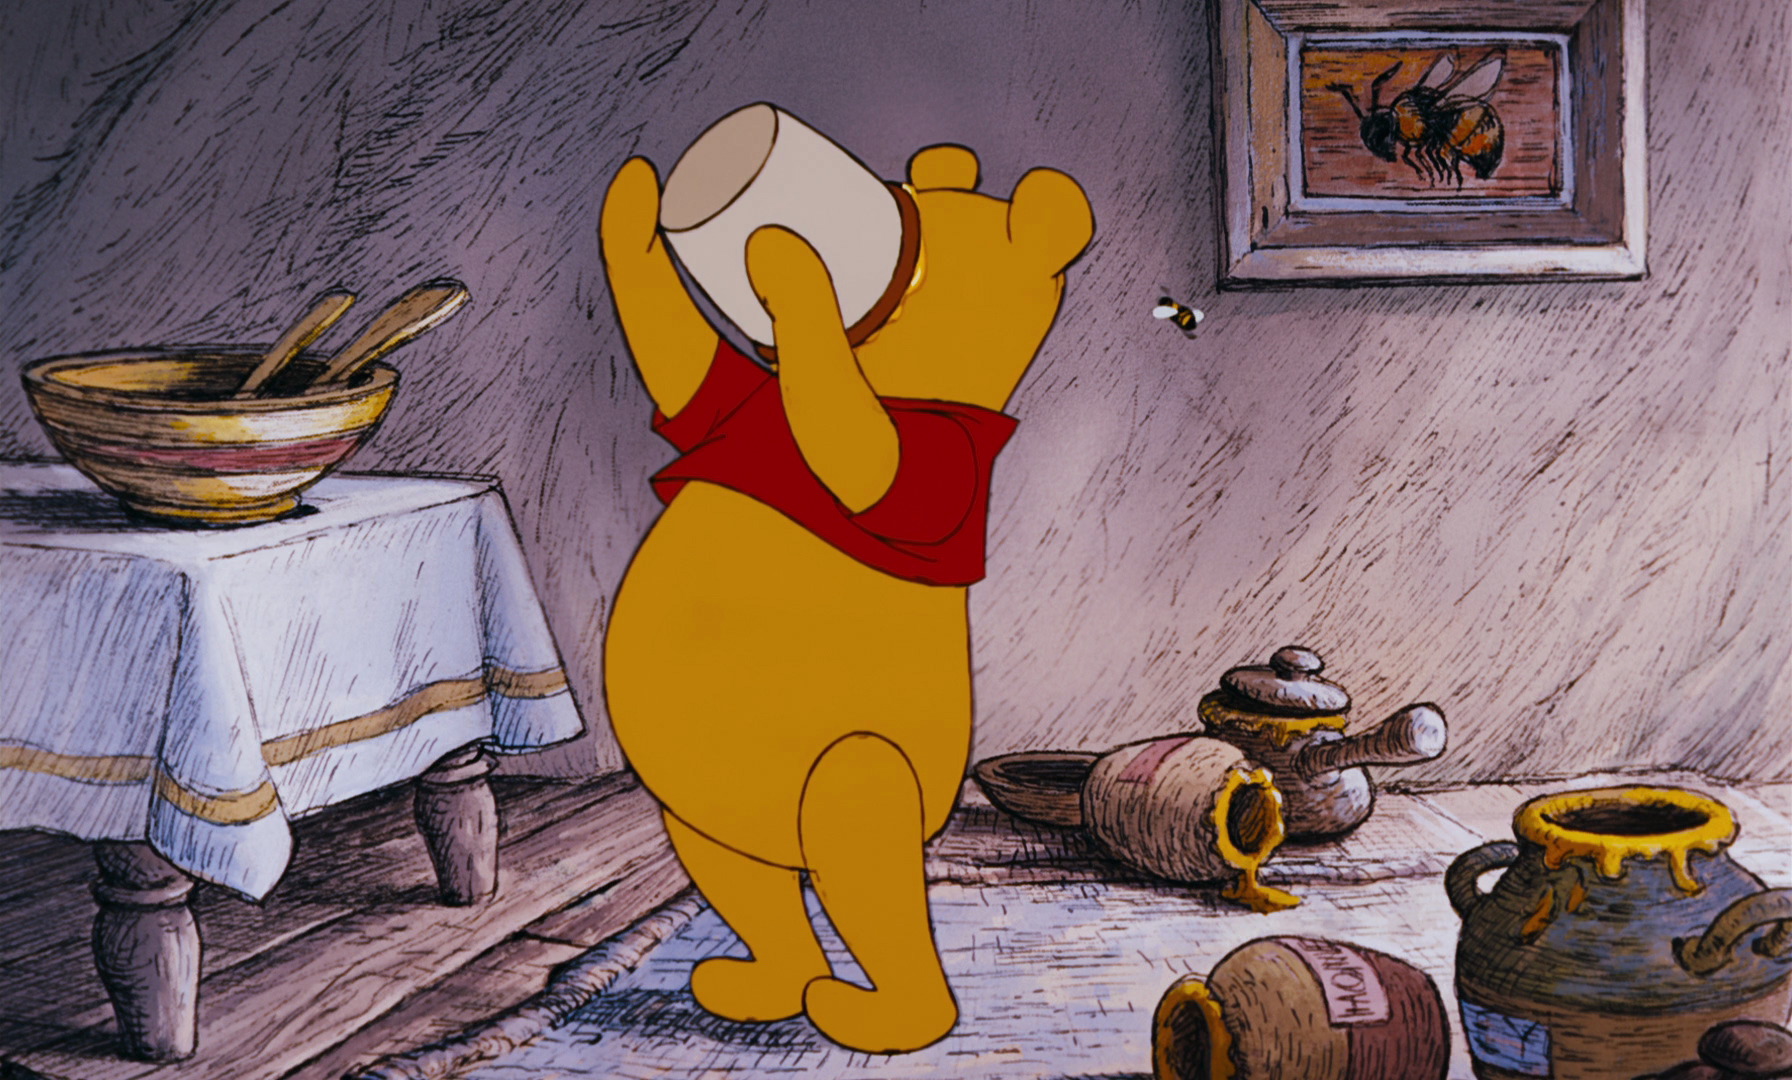 Winnie_the_Pooh_has_a_honey_pot_stuck_on_his_face